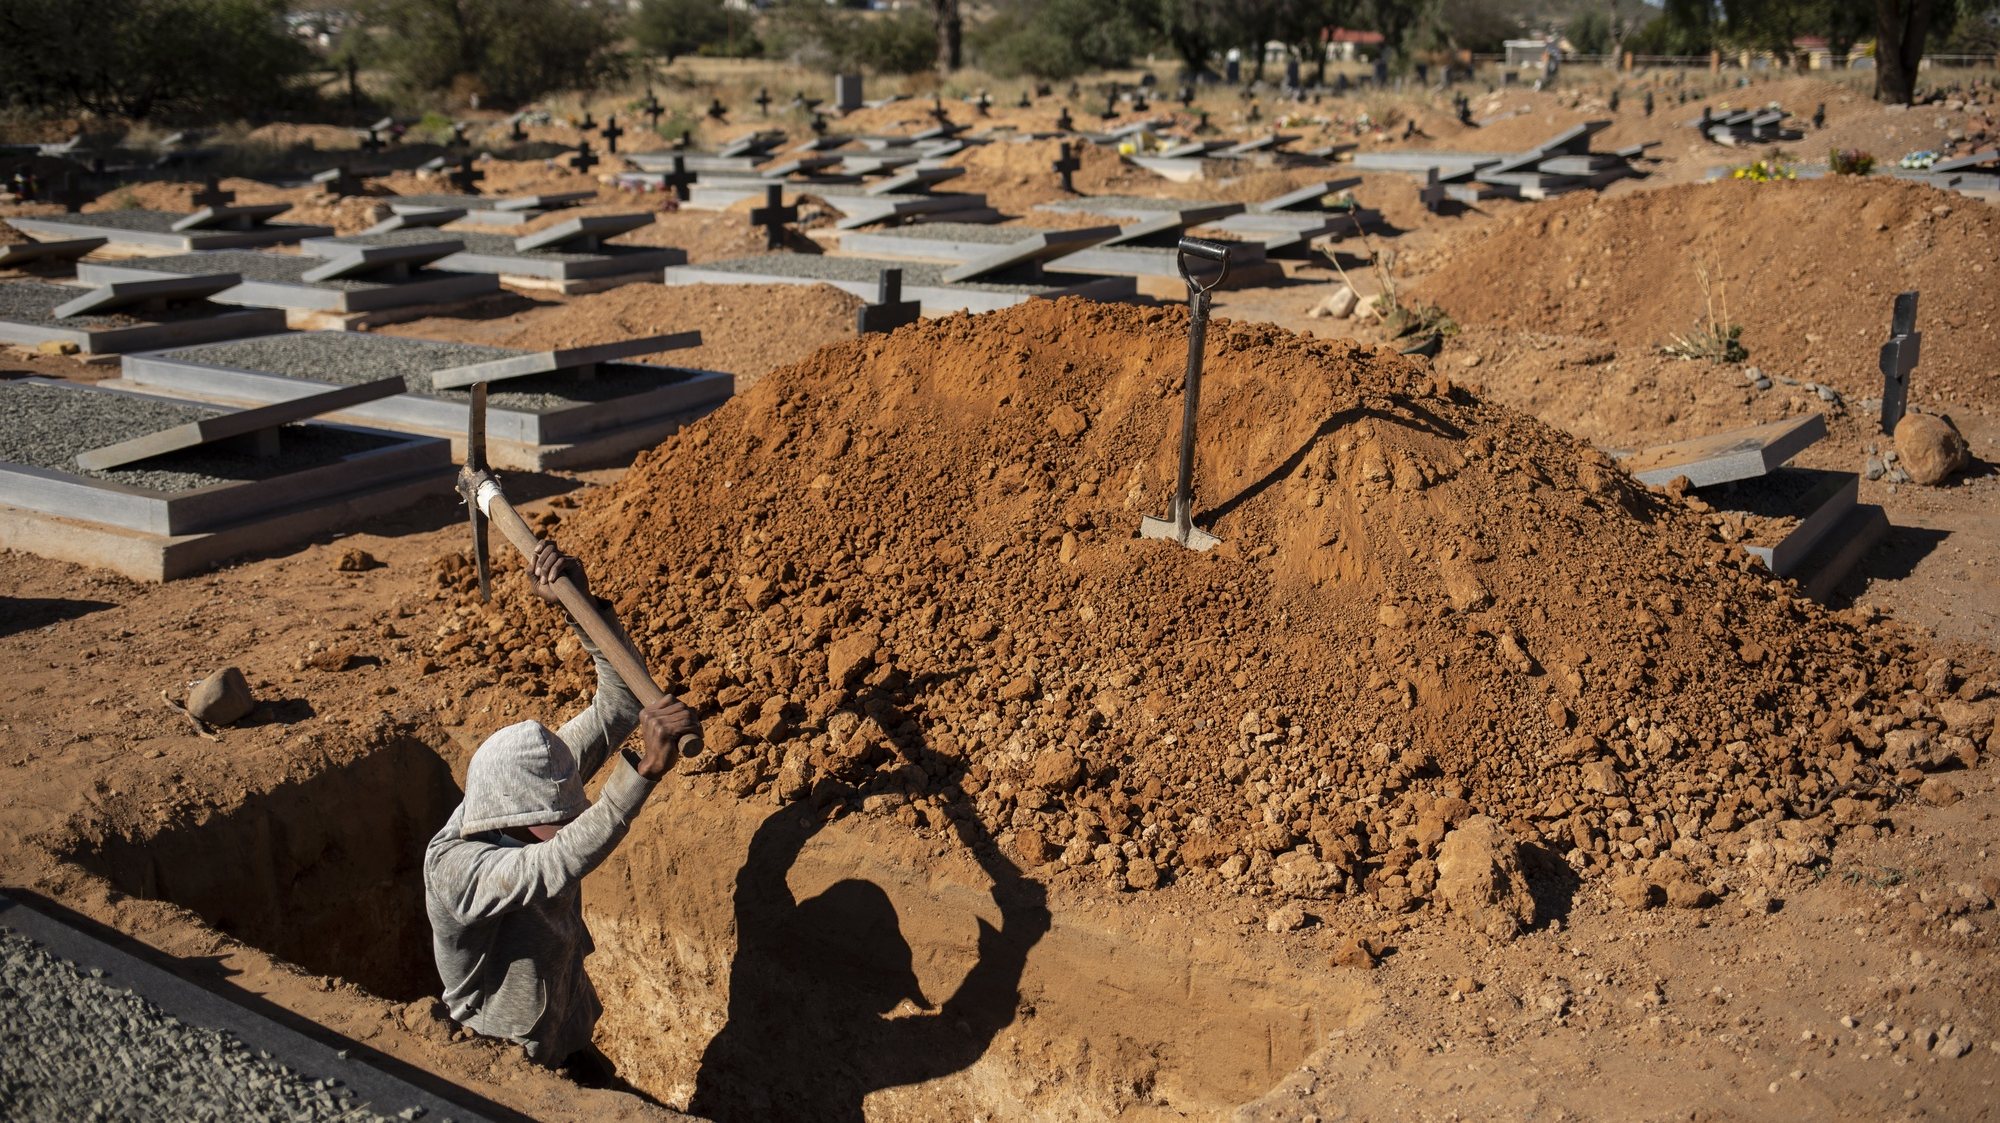 epa08493497 (03/28) Local grave digger Romio Bardman digs another grave in the town&#039;s graveyard in Graaff Reinet, South Africa, 12 June 2020. Romio has seen three Covid-19 victims buried in this graveyard. People who died with the coronavirus have to be buried within three days of dying. Romio usually digs graves the depth of his shoulders but has to dig coronavirus graves above his head. 
In the barren expanses of the Karoo (Great dry land) in the Eastern Cape province of South Africa, a perfect storm of circumstances has had a major and devastating effect on the local people. Three months of Covid-19 coronavirus lockdown, a harsh seven-year drought, and the ongoing impact of the general economic slowdown over the past years along with an ill-prepared local and provincial government have left the vast majority of the local people under financial, physical and spiritual pressure.  EPA/KIM LUDBROOK    ATTENTION: For the full PHOTO ESSAY text please see Advisory Notice epa08493494